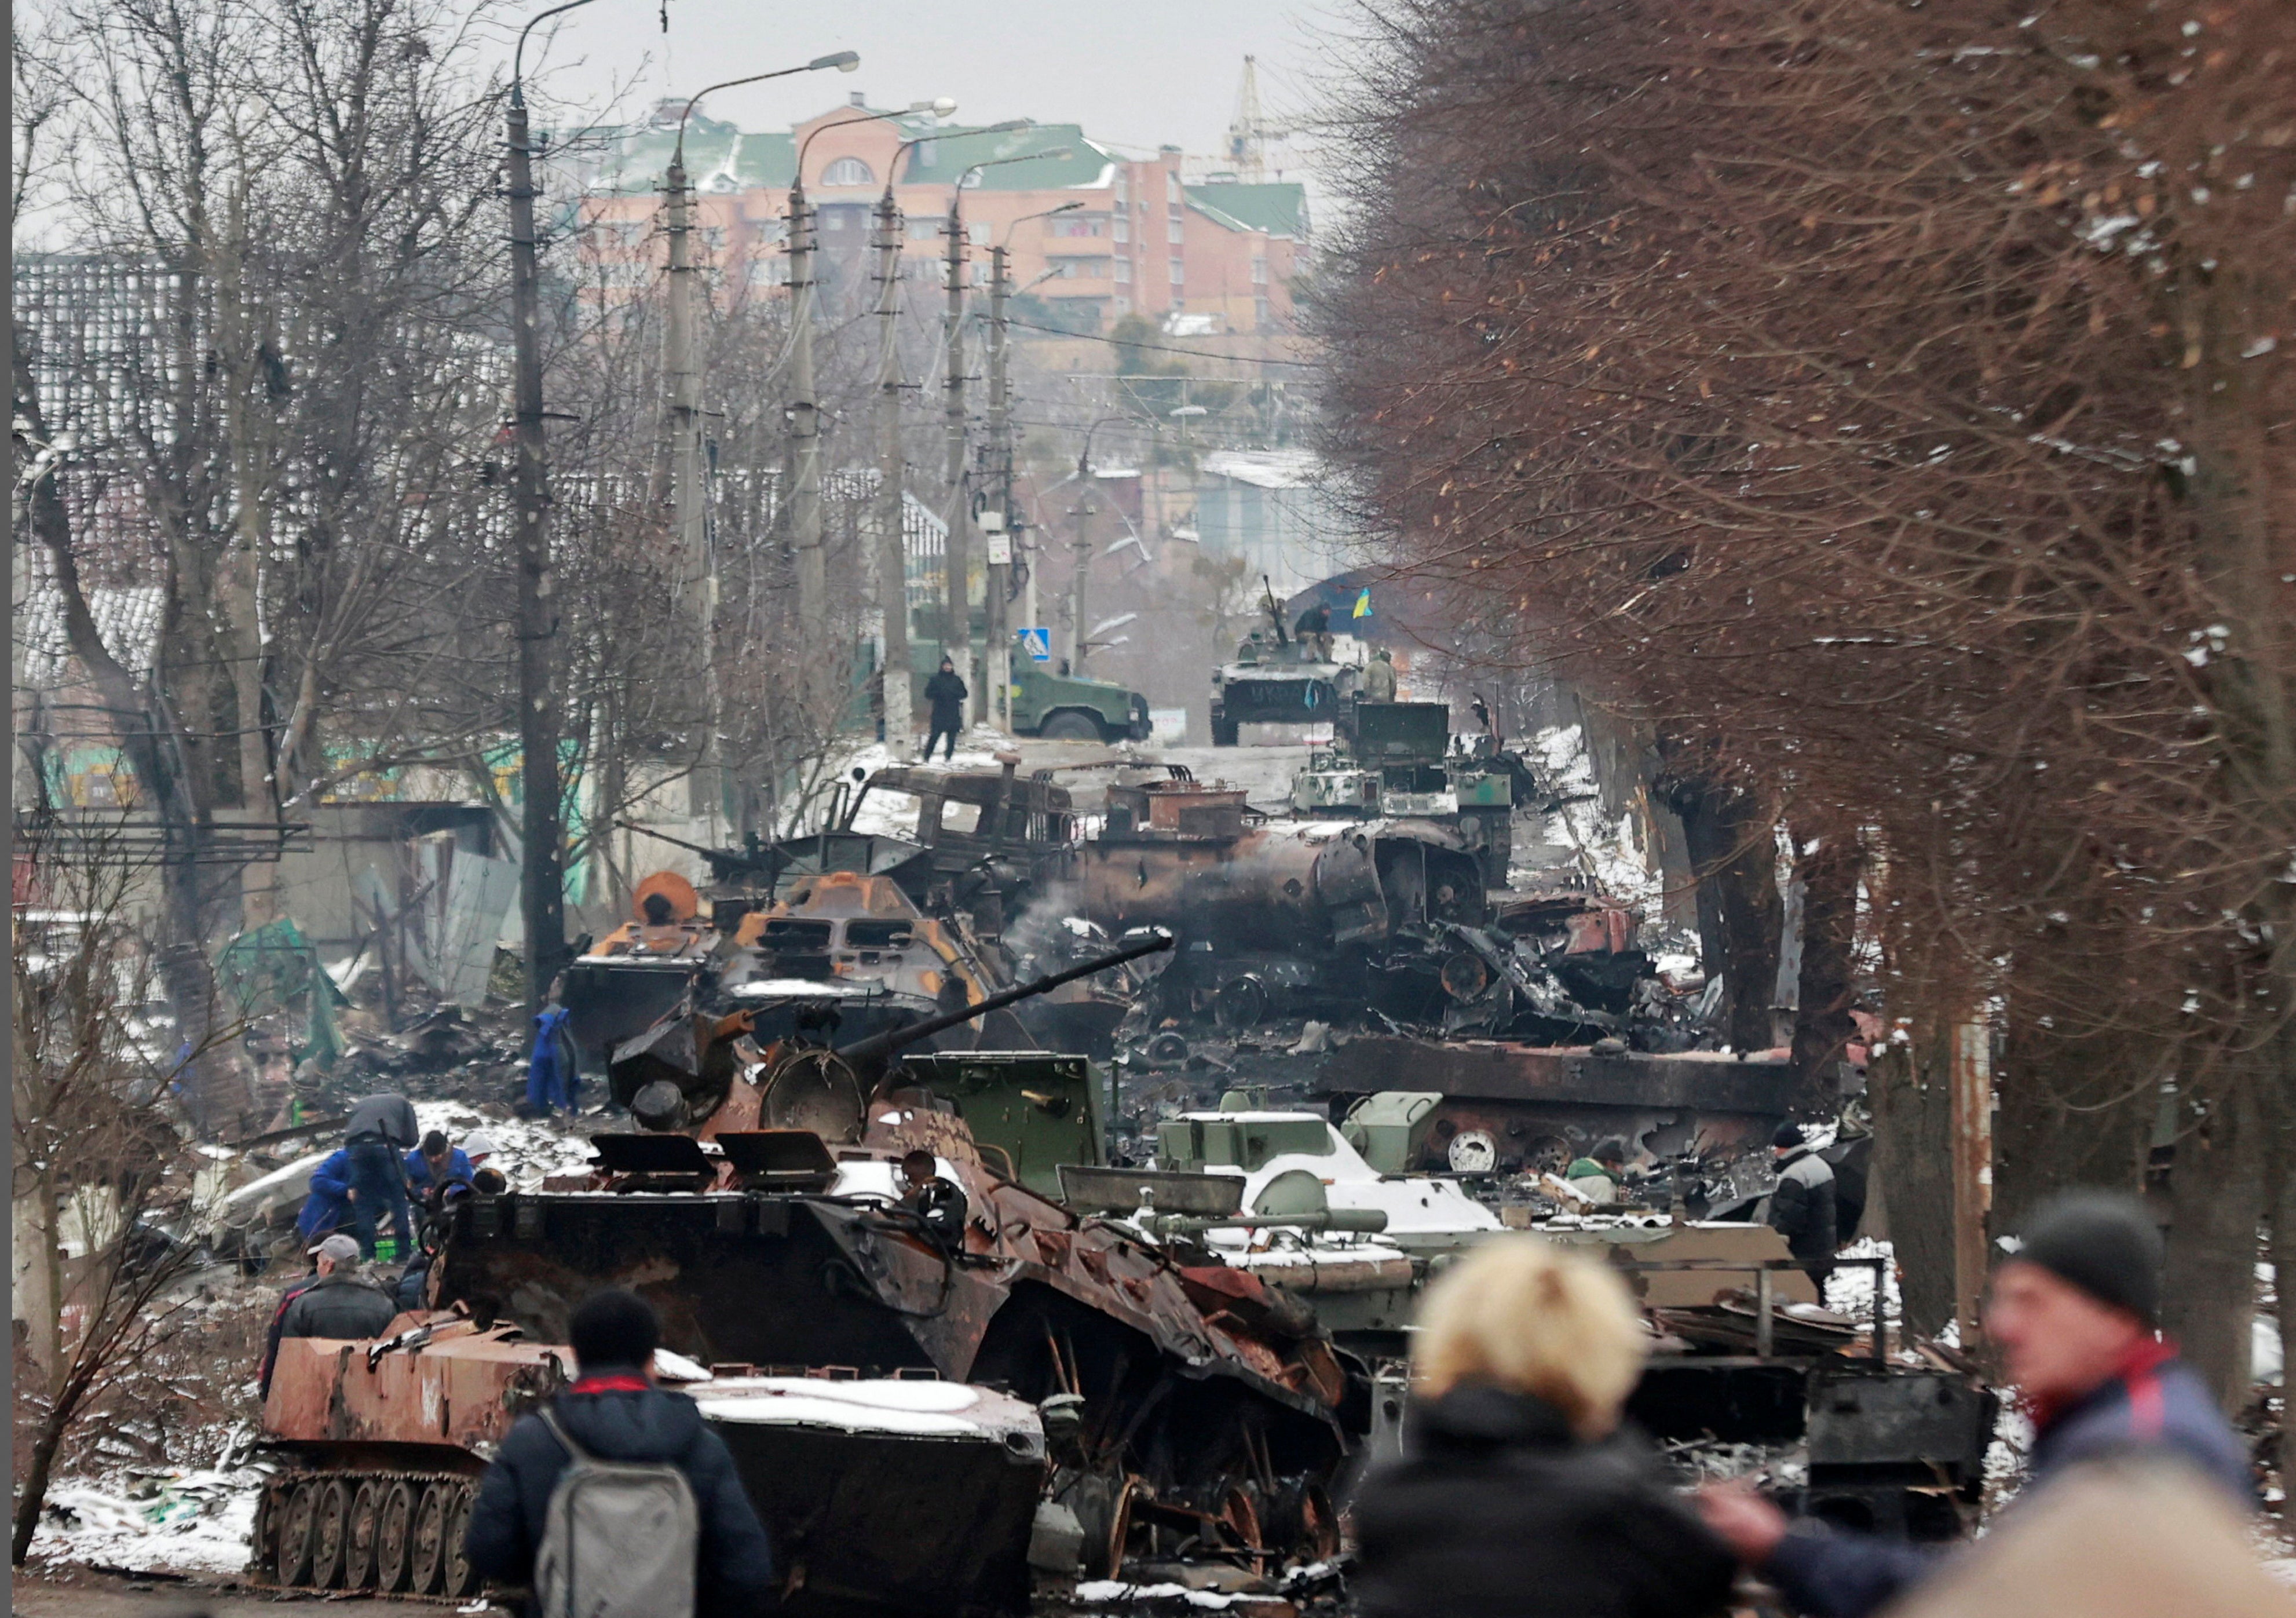 Destroyed military vehicles on a street in the town of Bucha in the Kyiv region